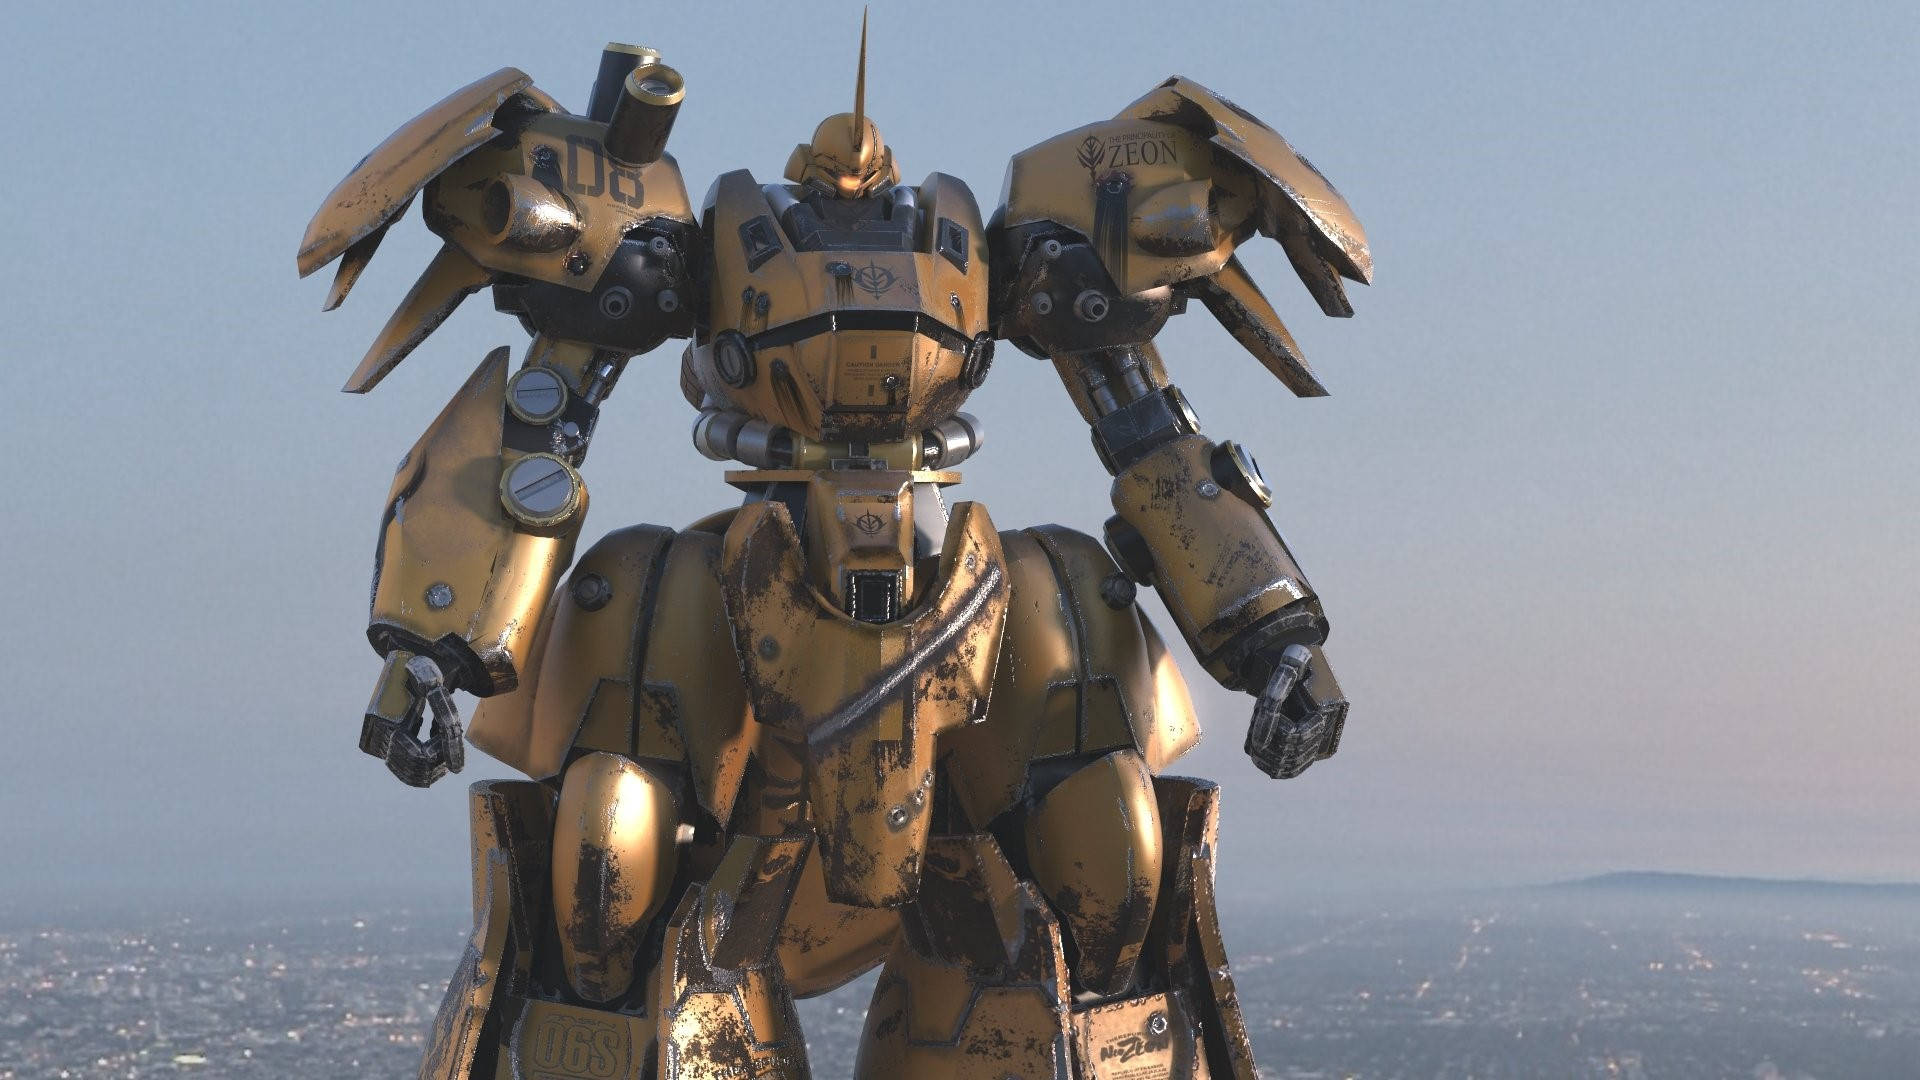 Yellow Robot From Mobile Suit Gundam Background